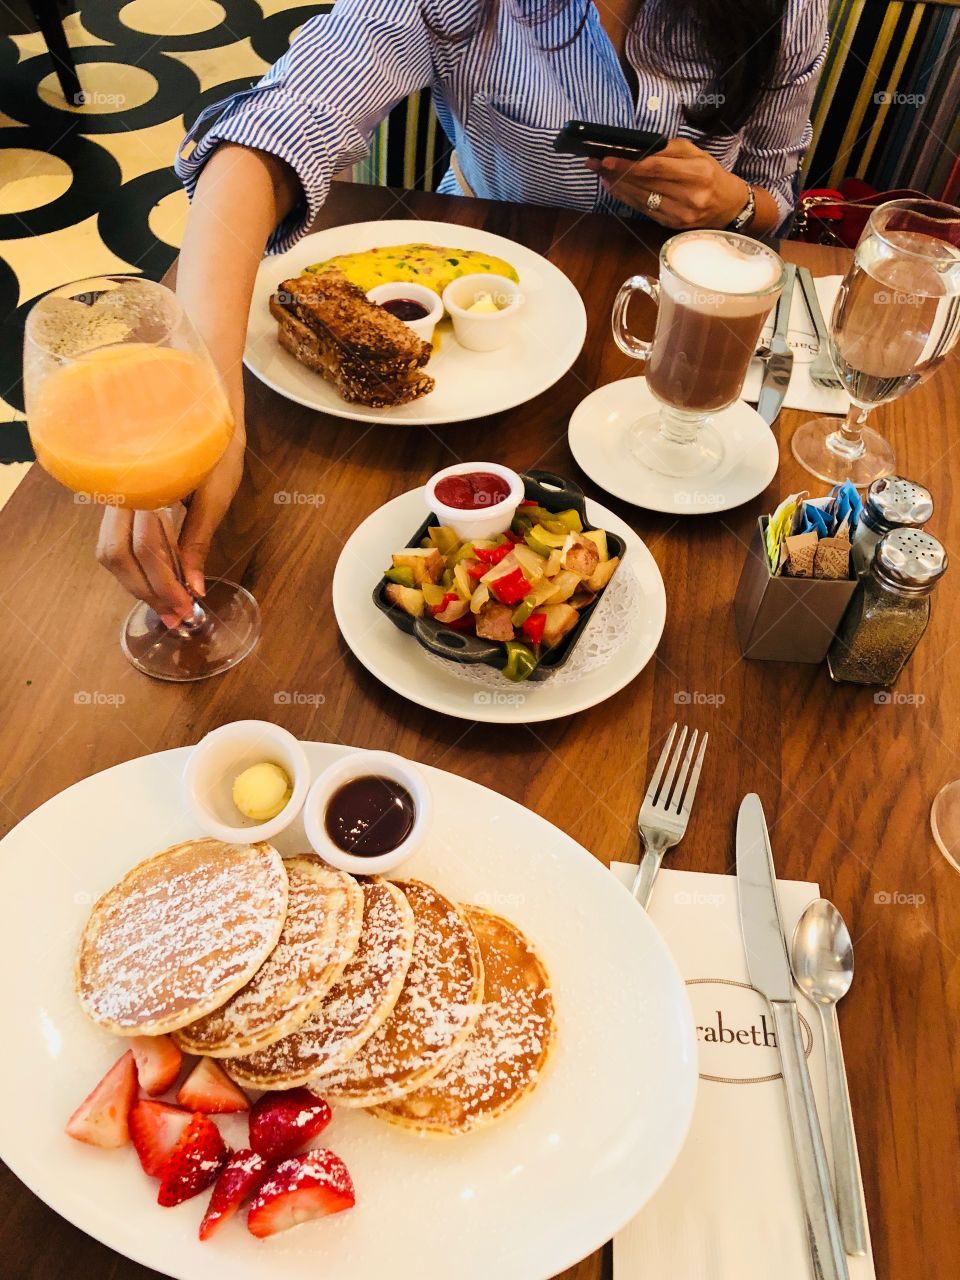 The perfect breakfast as sarabeths in New York ! Pancakes ! Banana smoothies! Potatoes ! Eggs 